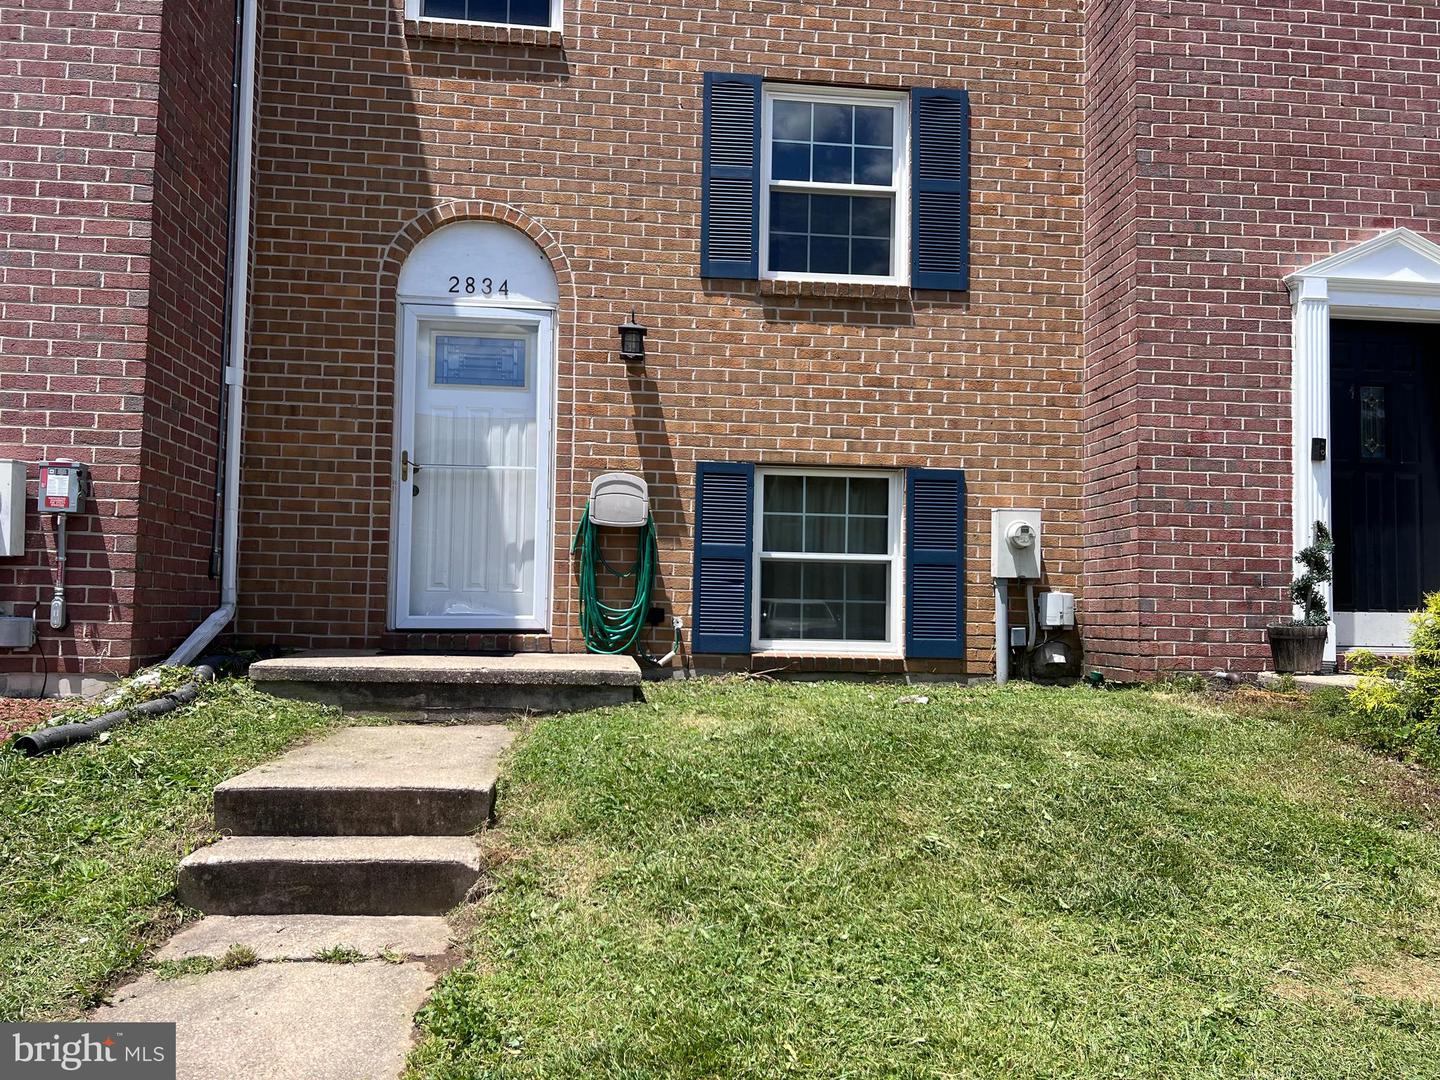 View Edgewood, MD 21040 townhome